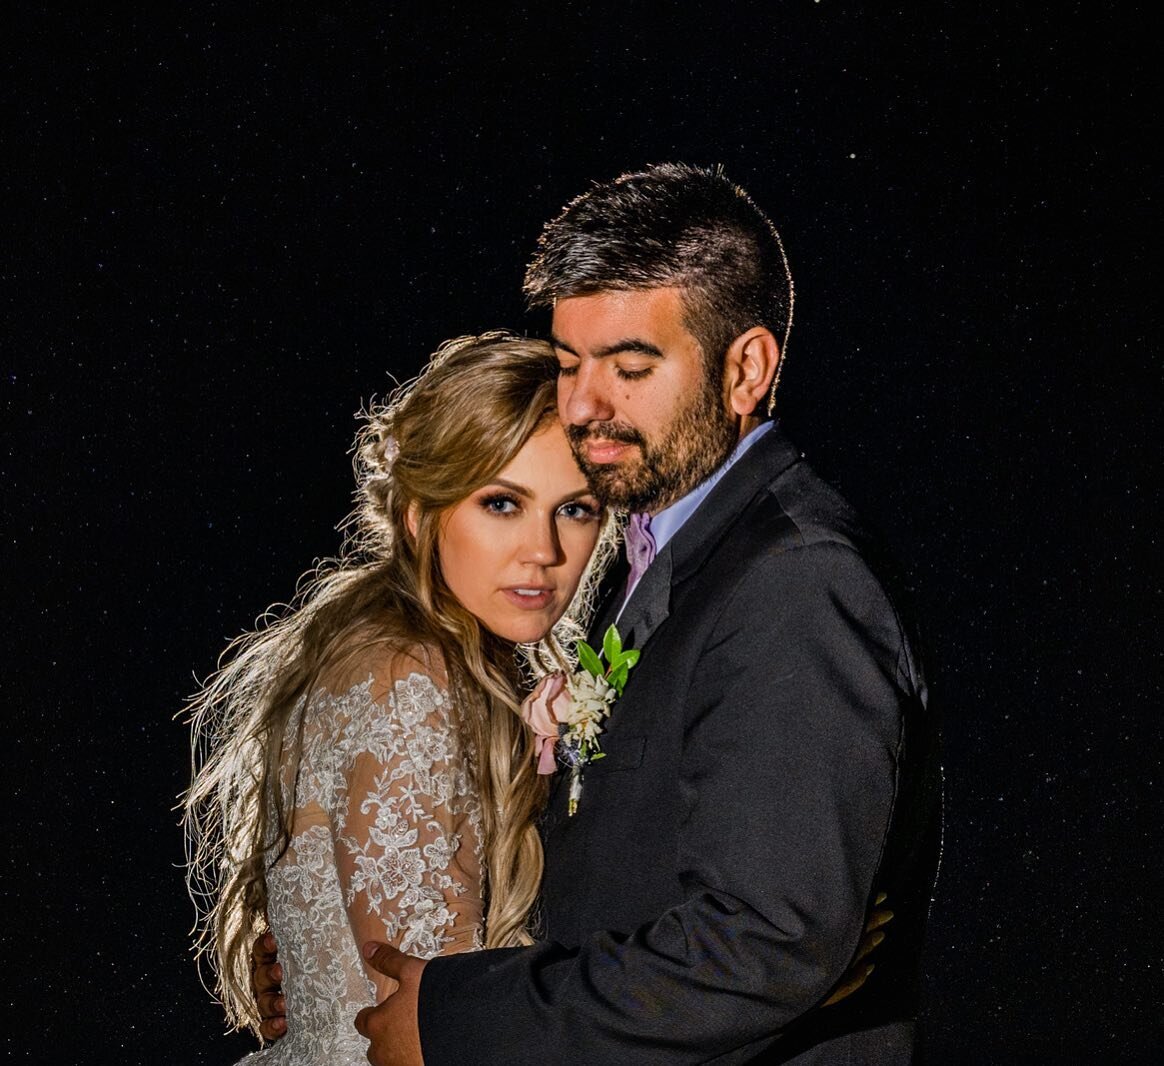 We love beautiful weddings especially when we get to create something unique and special for the bride and groom.  Look closely and you can see the galaxy! #astroweddingphotography #love #weddingphotography #theknot #southernbridemagazine